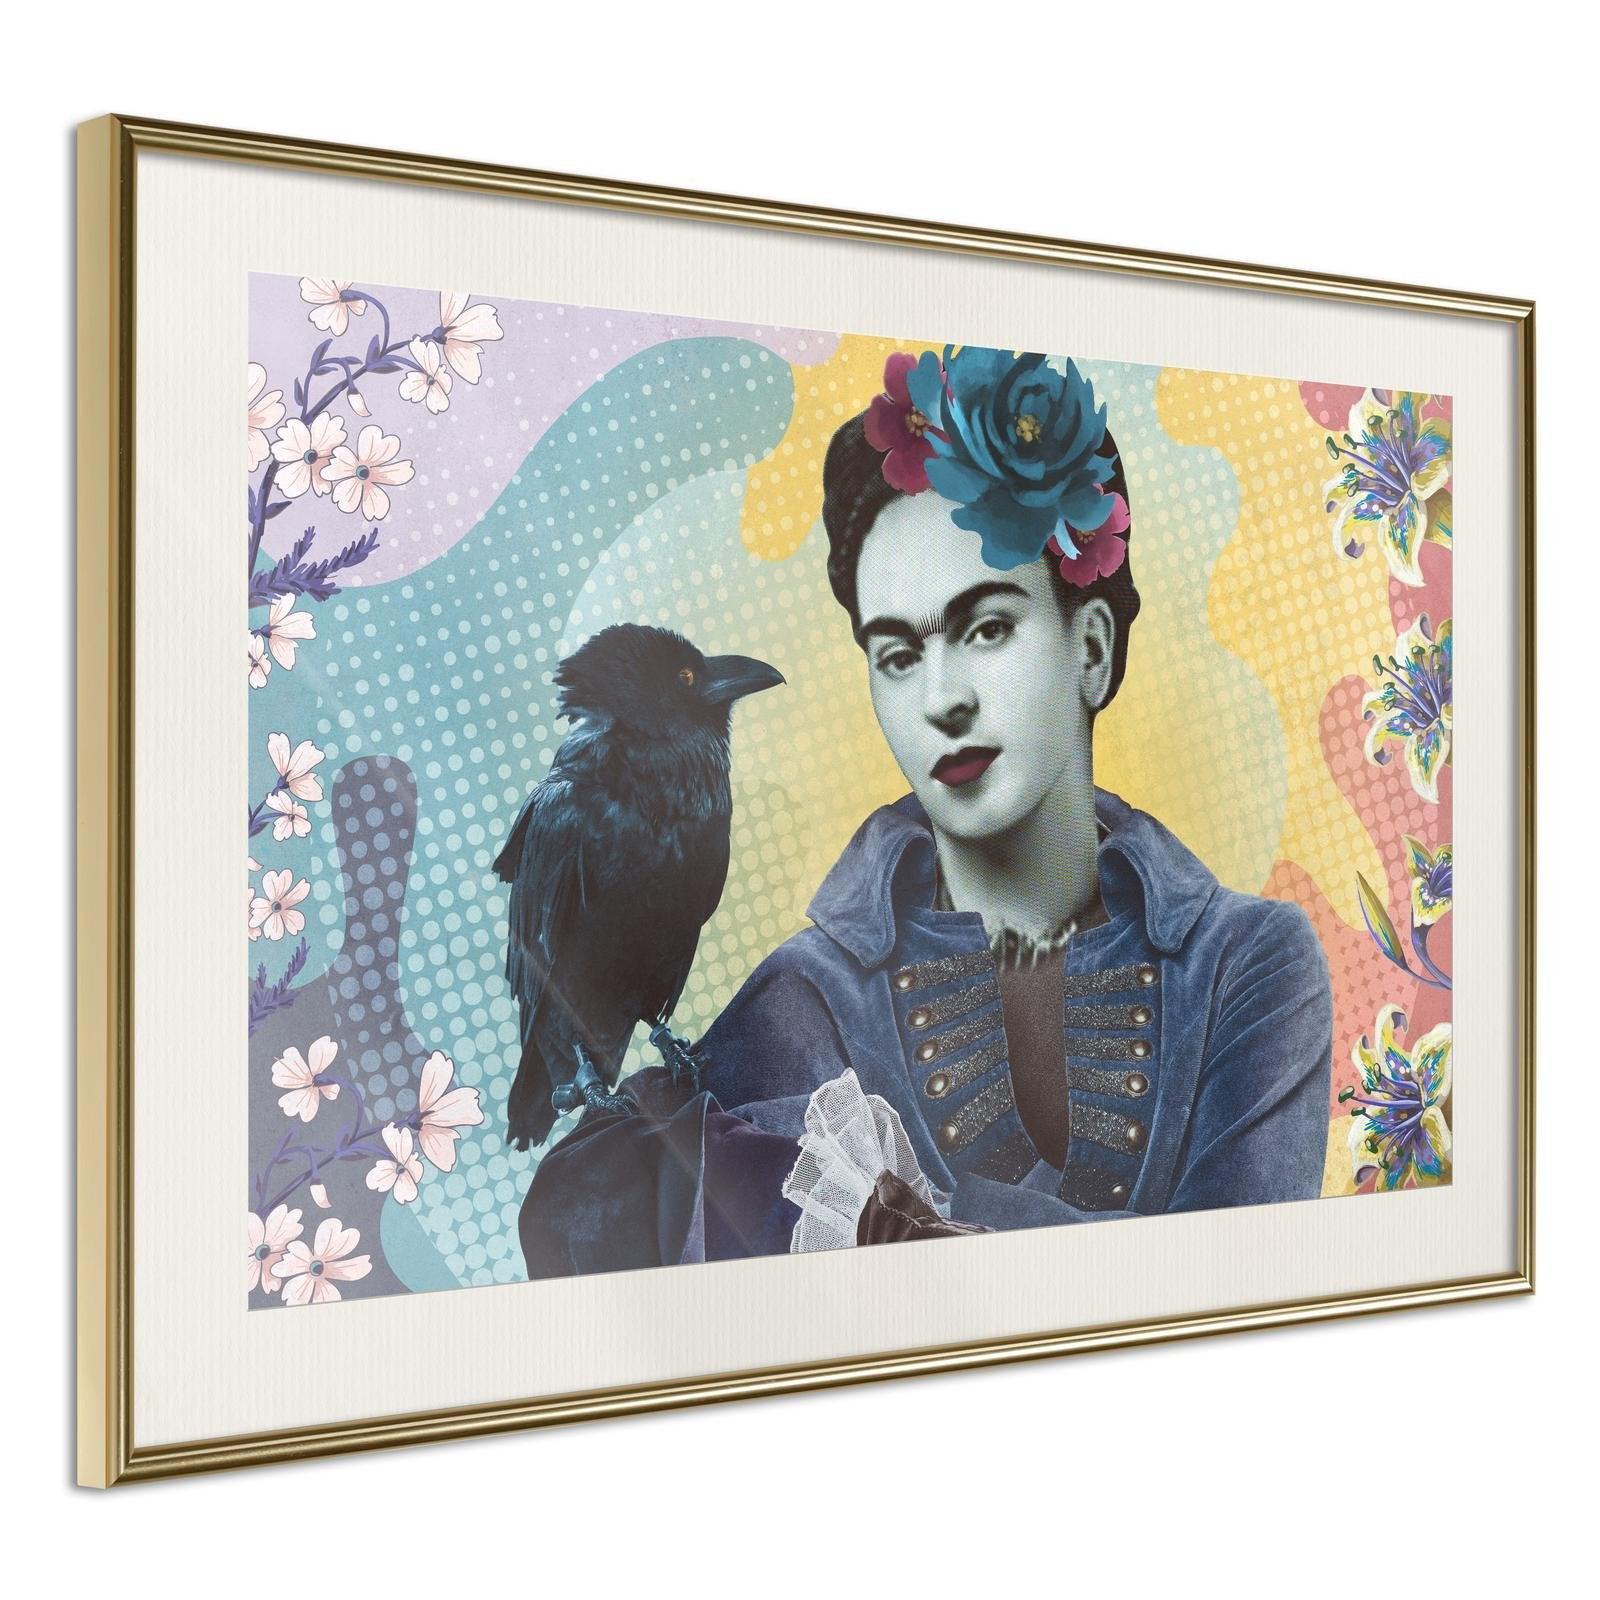 Inramad Poster / Tavla - Frida with a Raven-Poster Inramad-Artgeist-30x20-Guldram med passepartout-peaceofhome.se